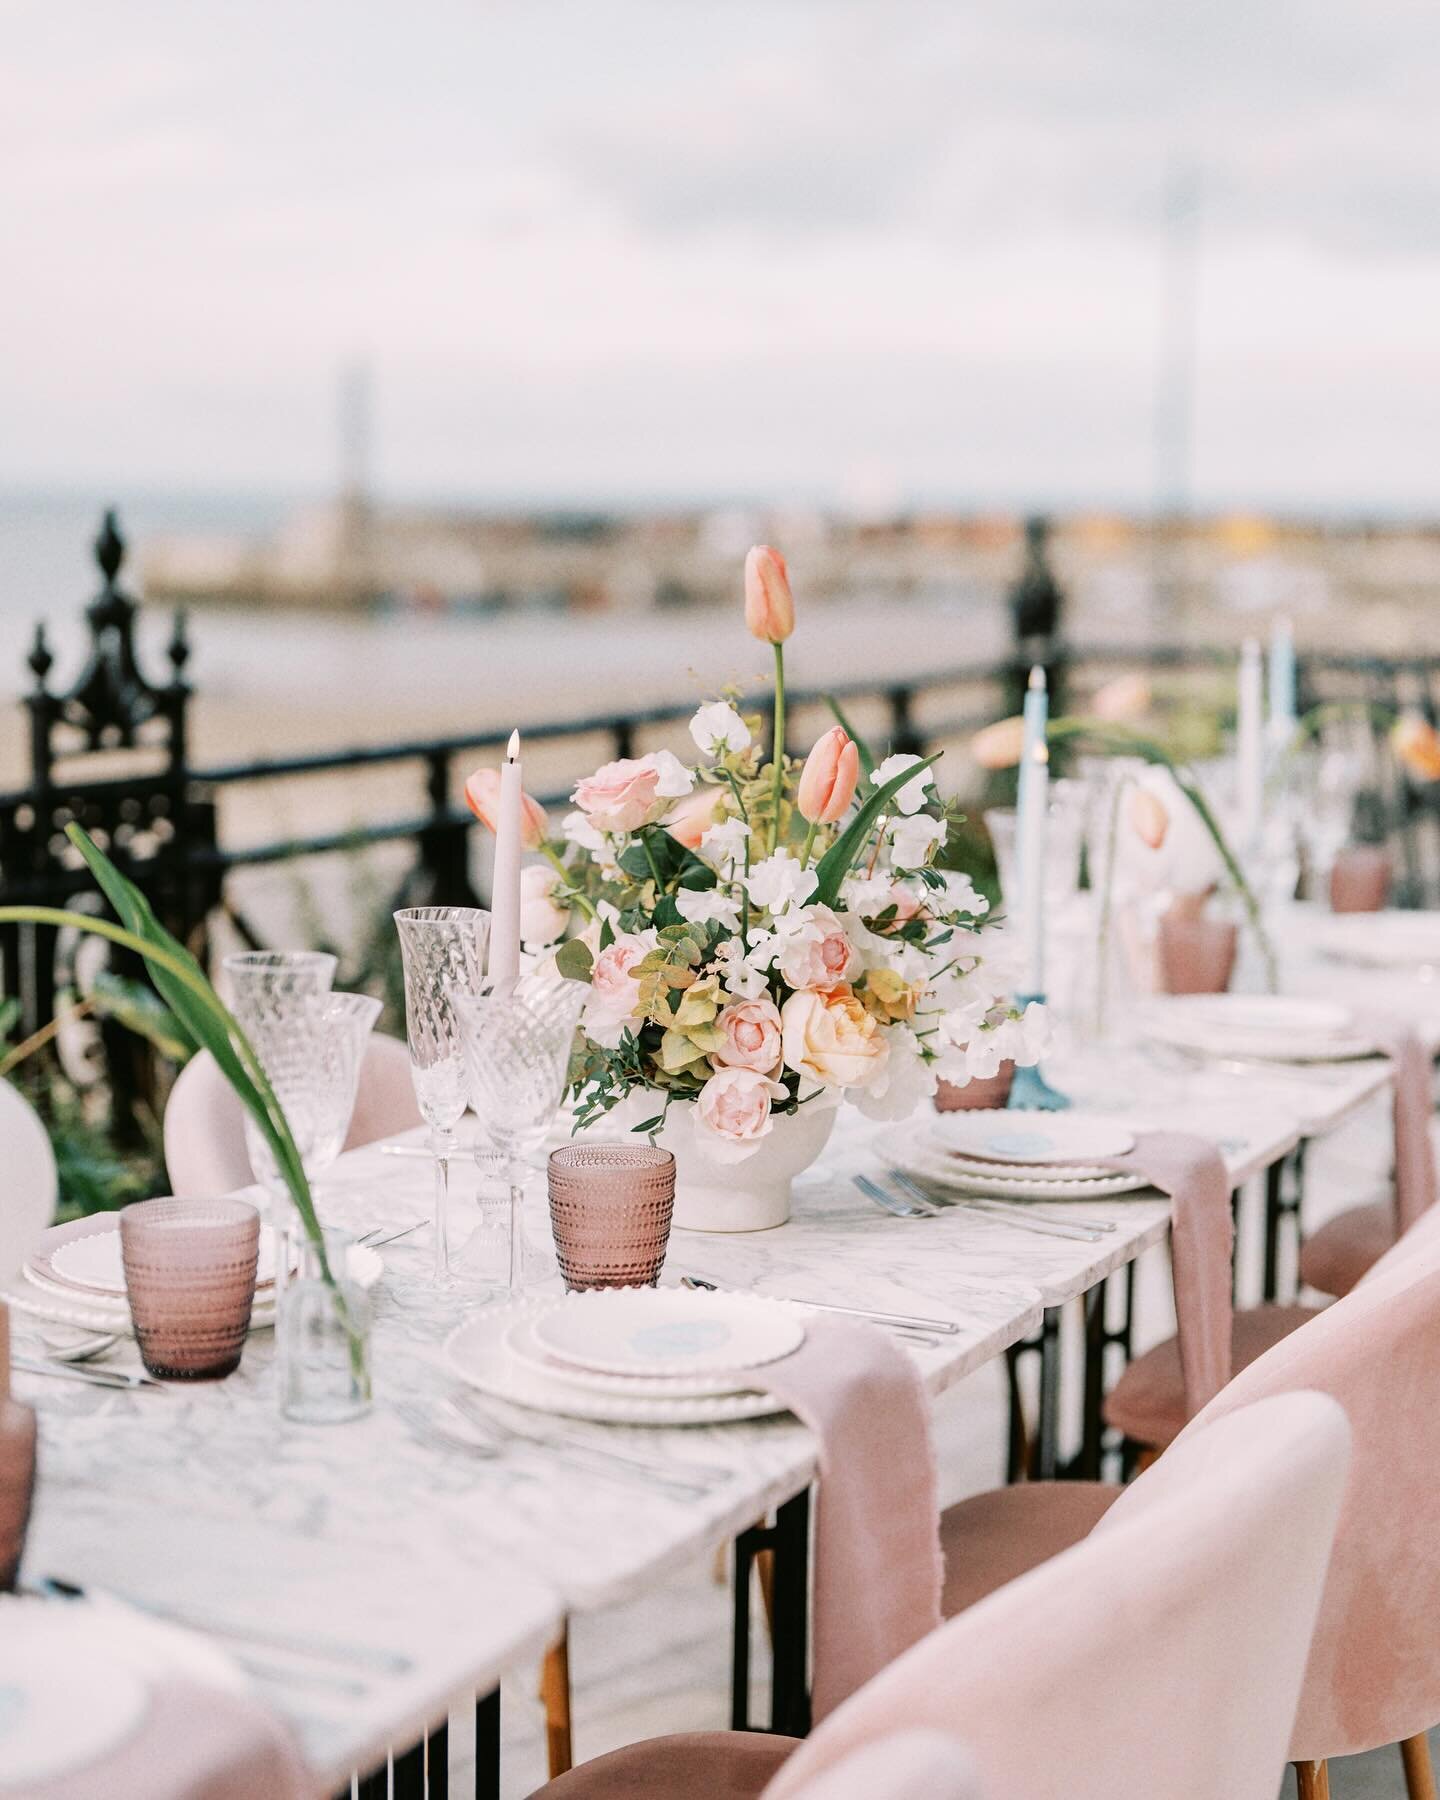 A few weeks ago we spent some time down at the beautiful  No 42 hotel in Margate, working on a couple of set ups to showcase the amazing spaces and views. We hope you like it! 🌸🌷

Featuring: 
Luna Cutlery 
Fleur Glassware
Parla Dinnerware 
Ruby Tum